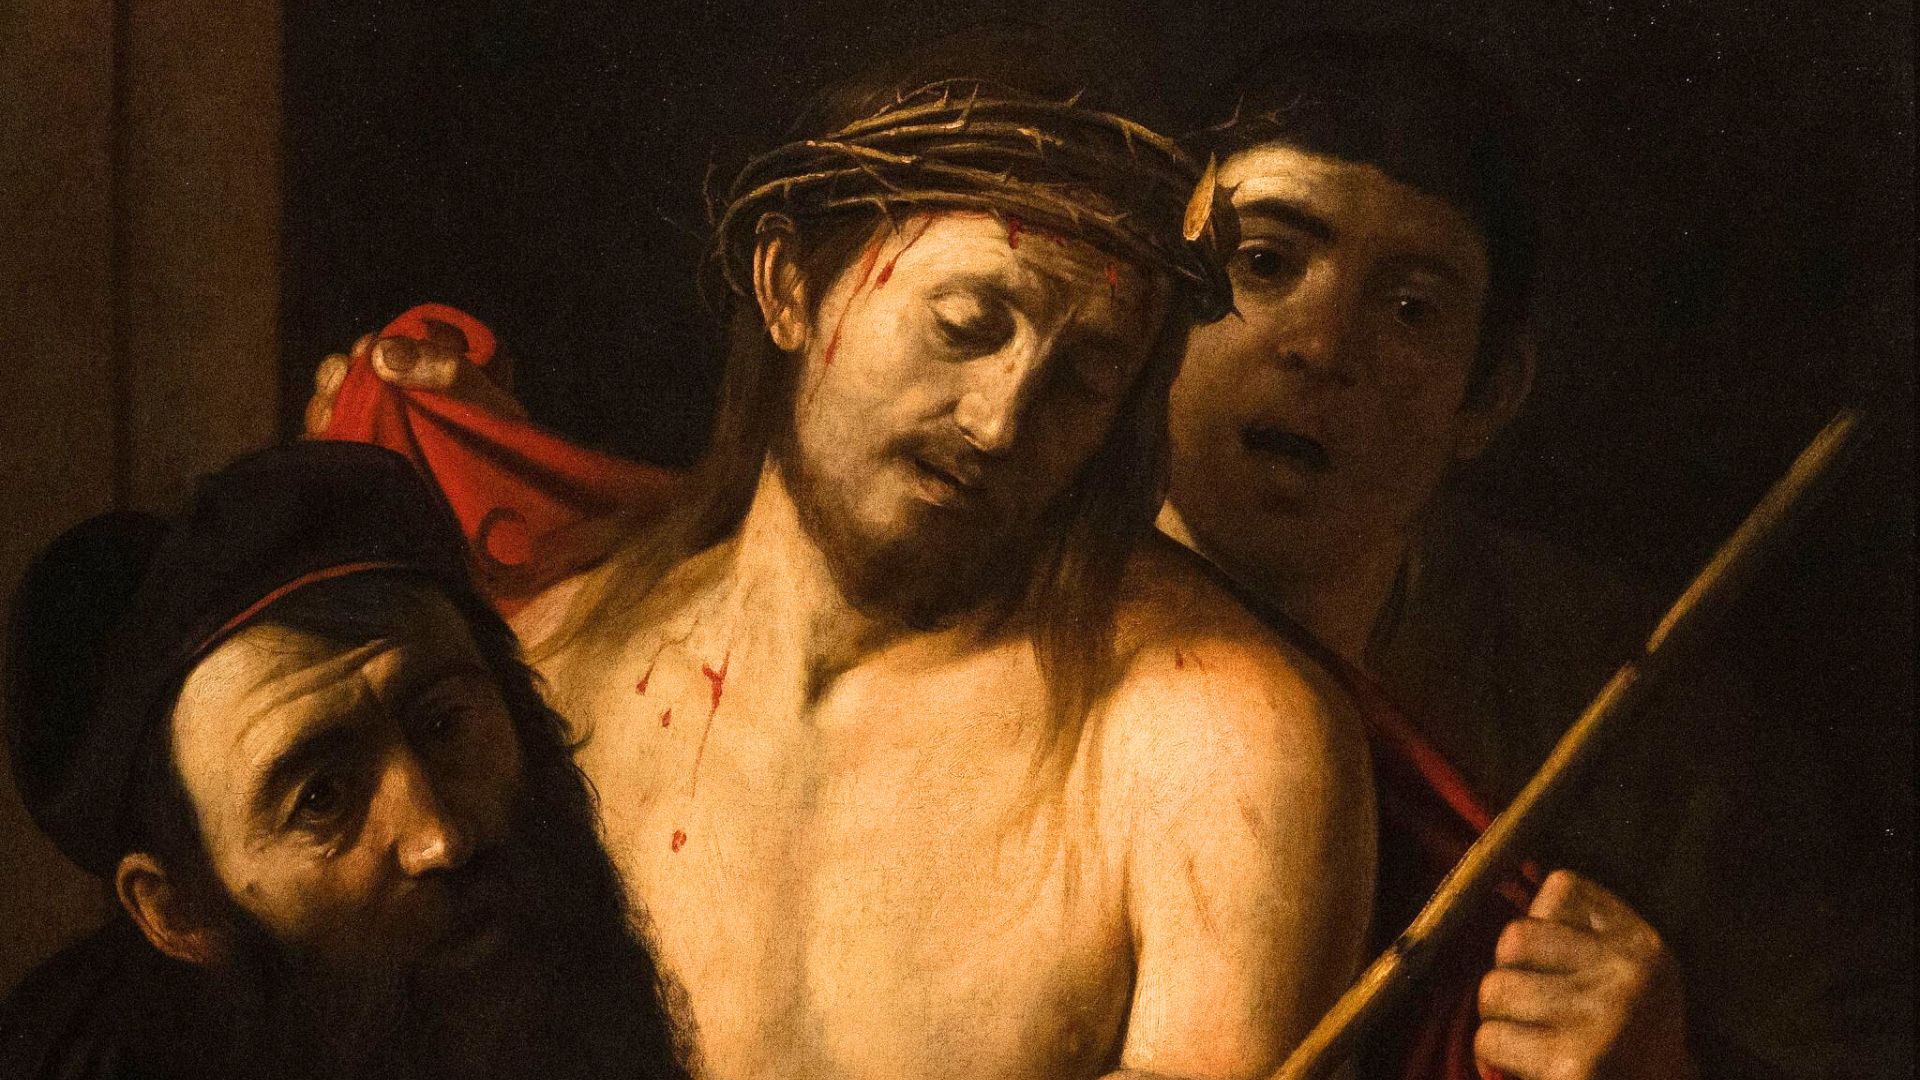 'Ecce Homo' depicts a scene leading up to Christ's crucifixion. /CFP